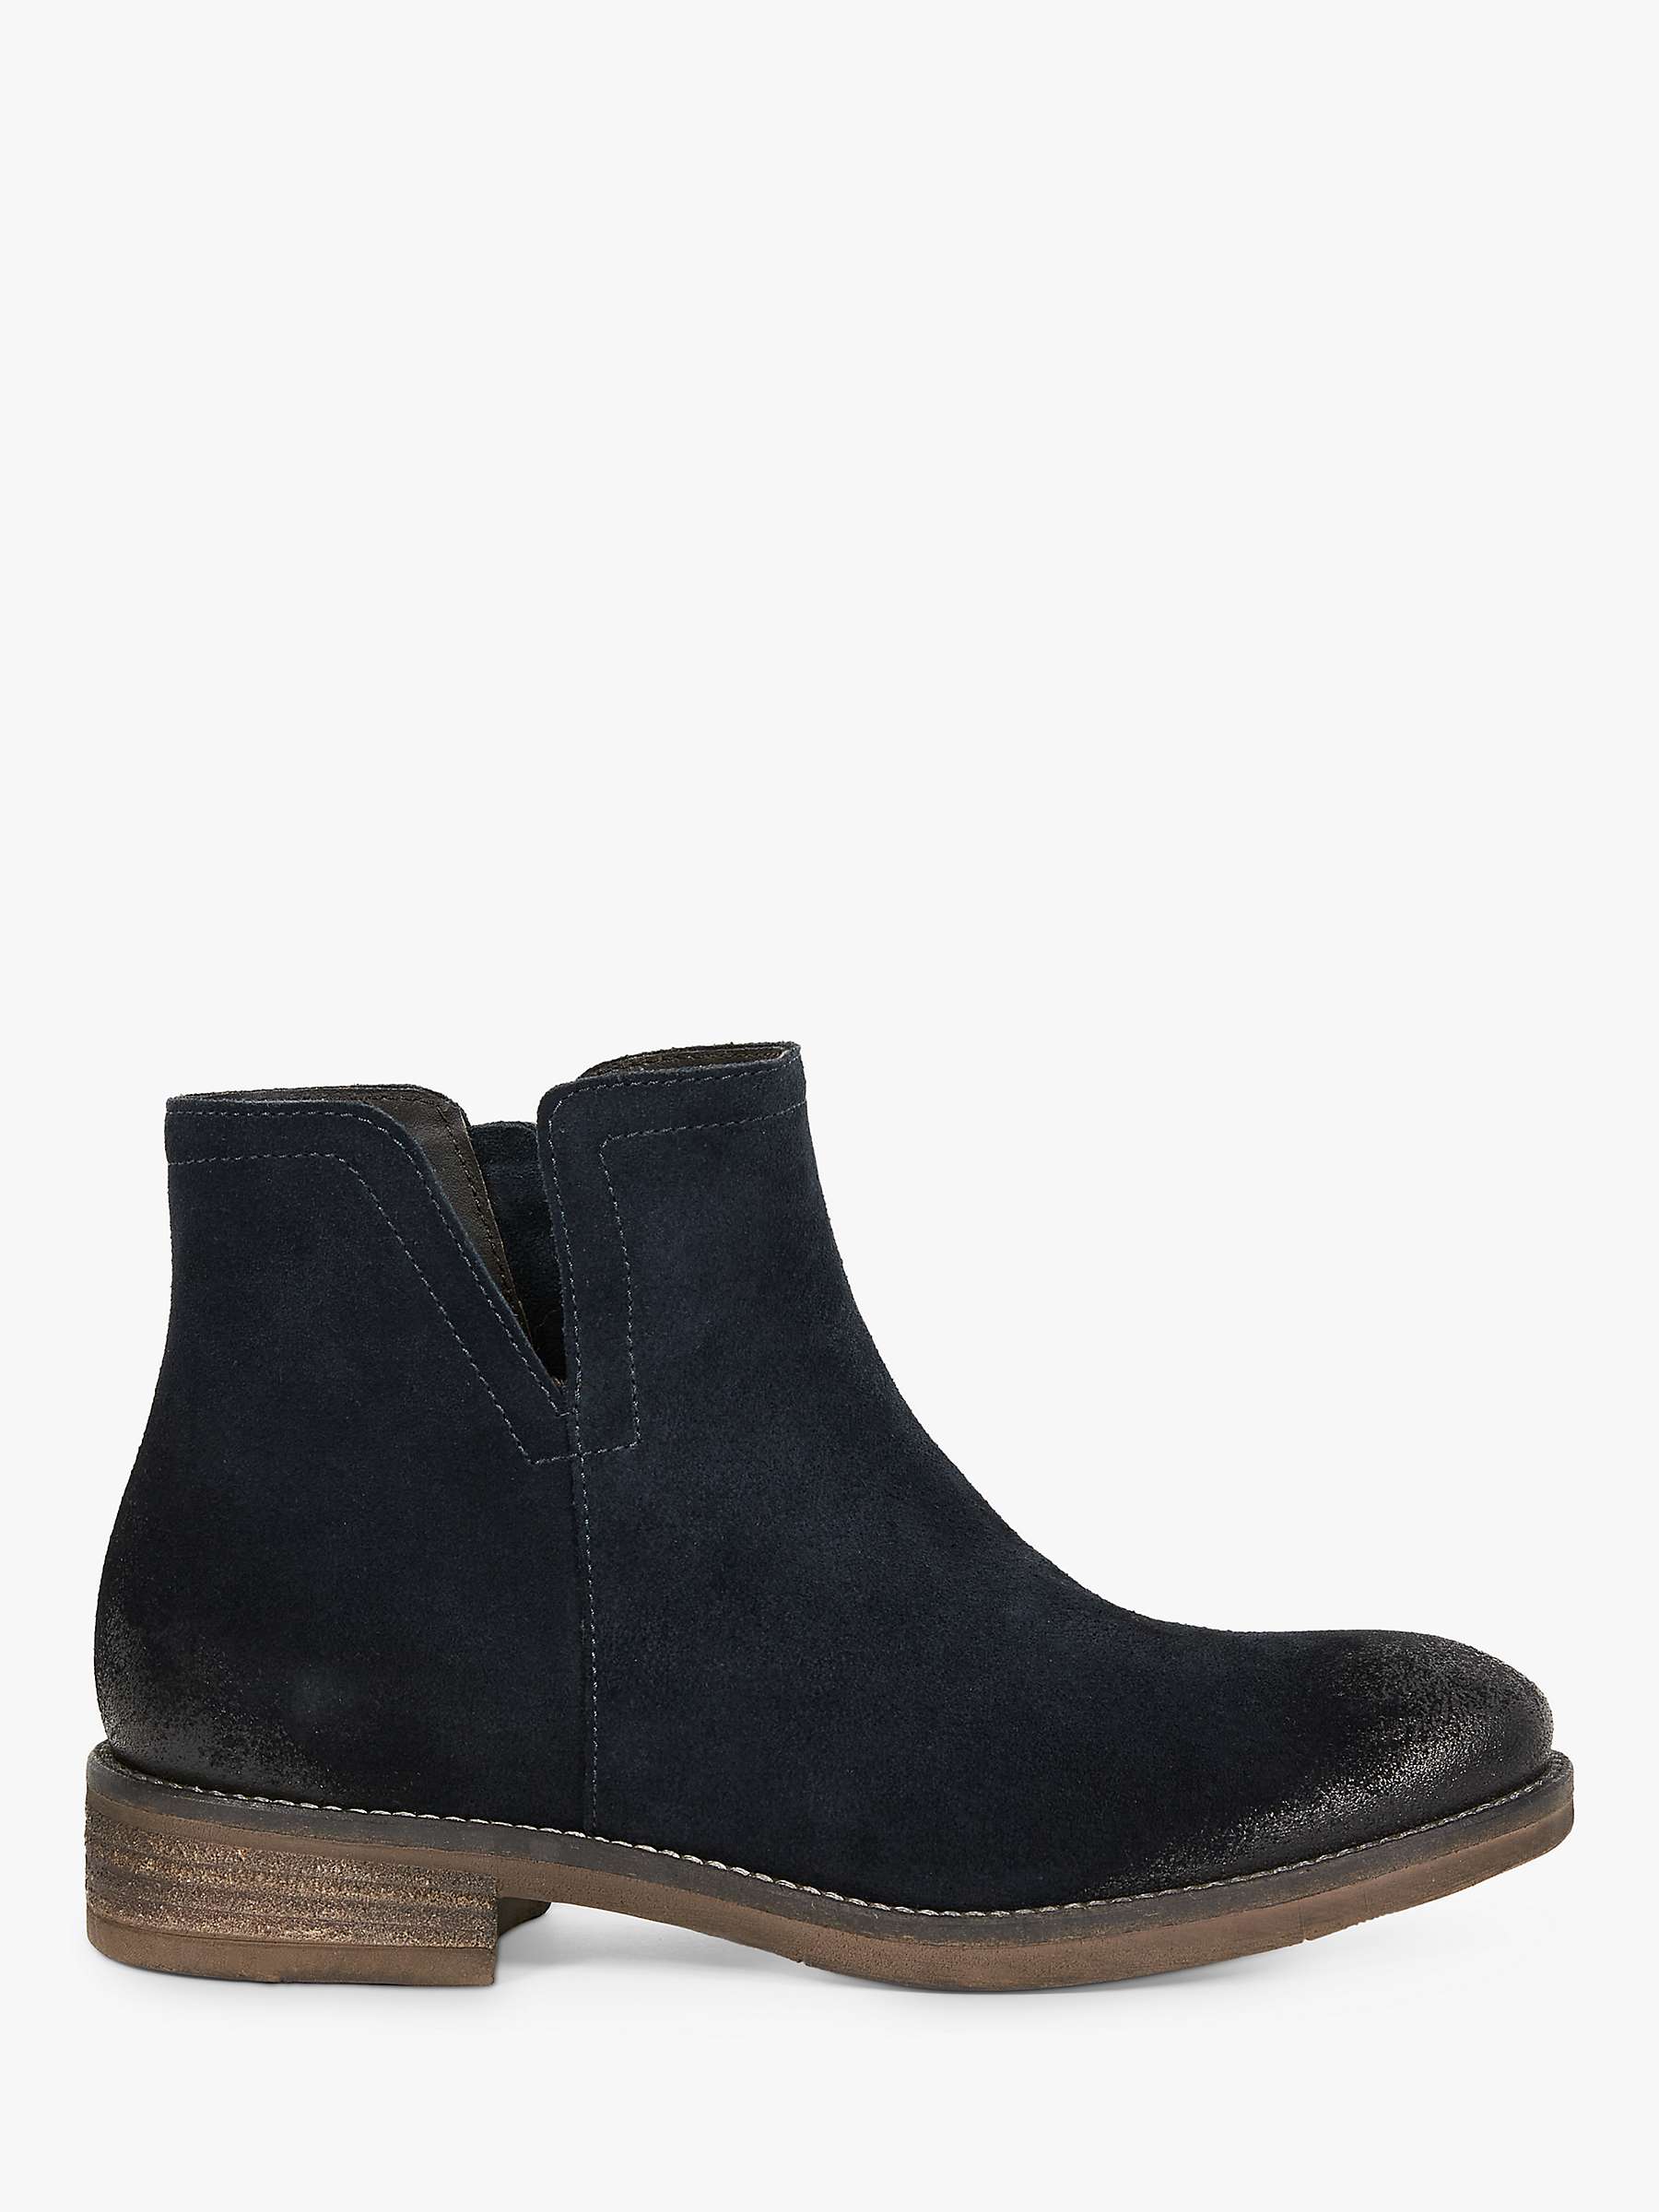 Celtic & Co. Suede Notched Ankle Boots, Navy at John Lewis & Partners